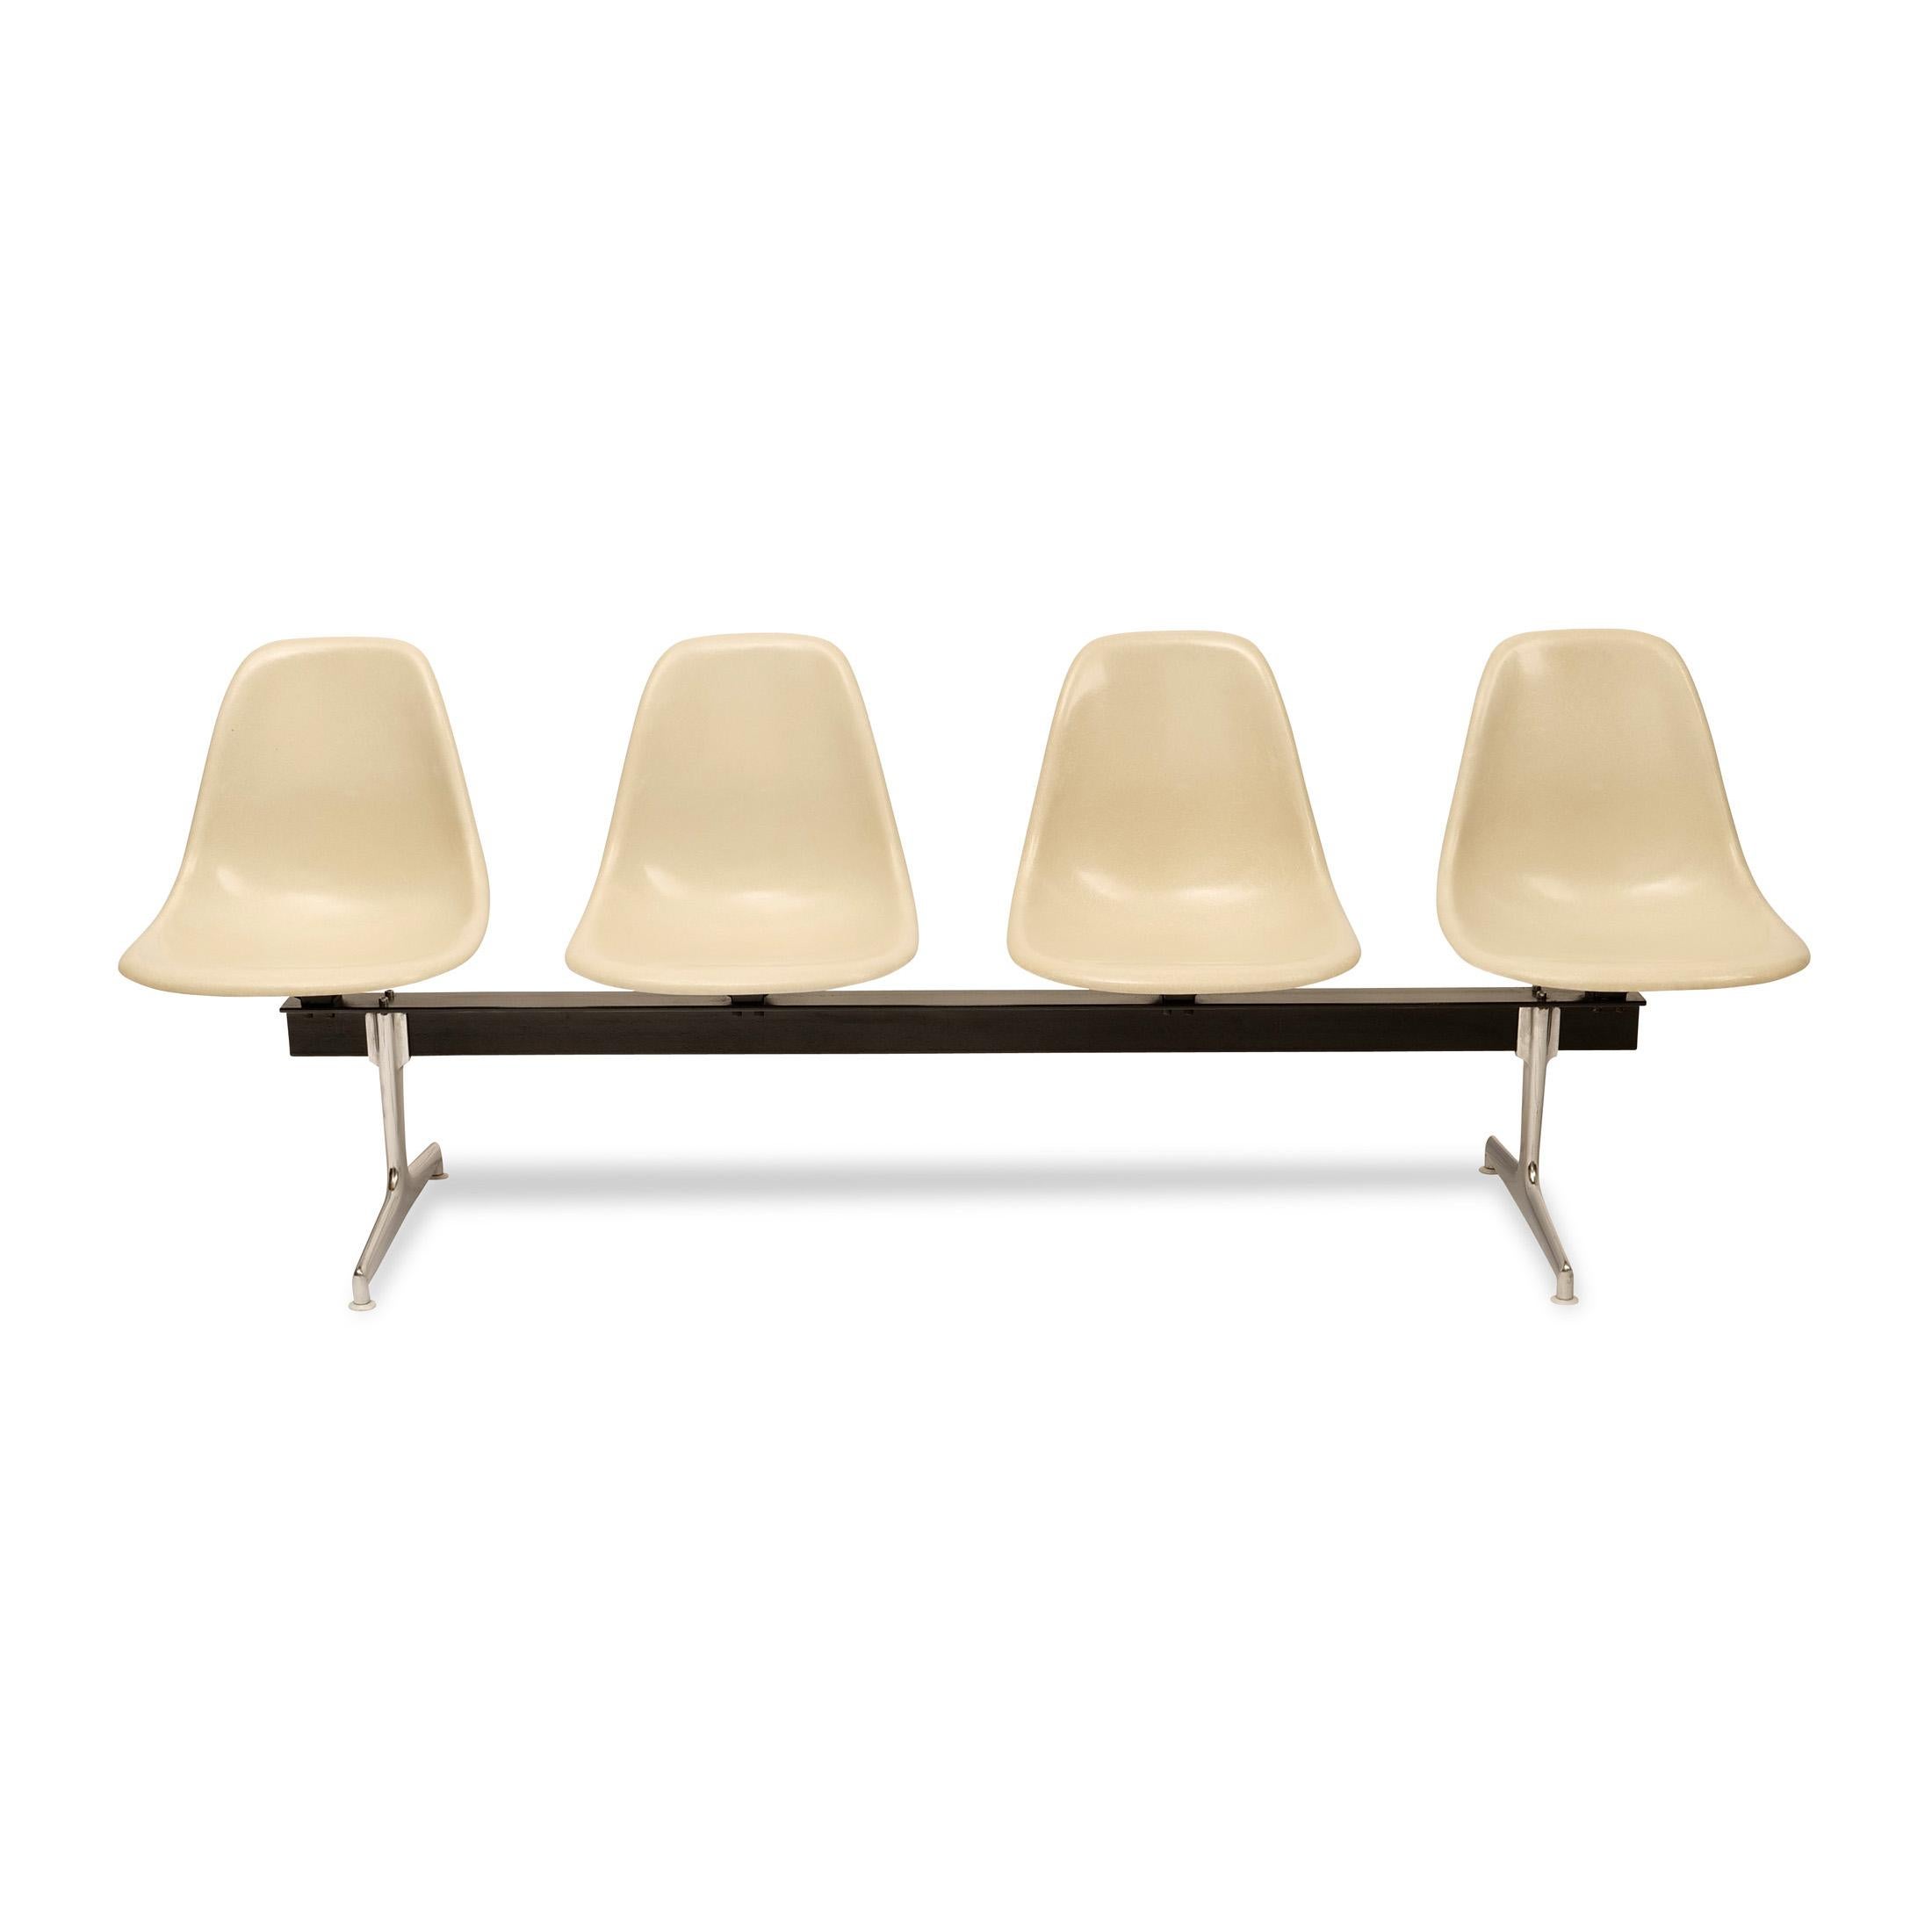 Bench, 4 fiberglass seat shells, color Parchment, design Charles & Ray Eames, metal frame with chrome-plated sled feet.

height 80 cm, width 222 cm, depth 55 cm